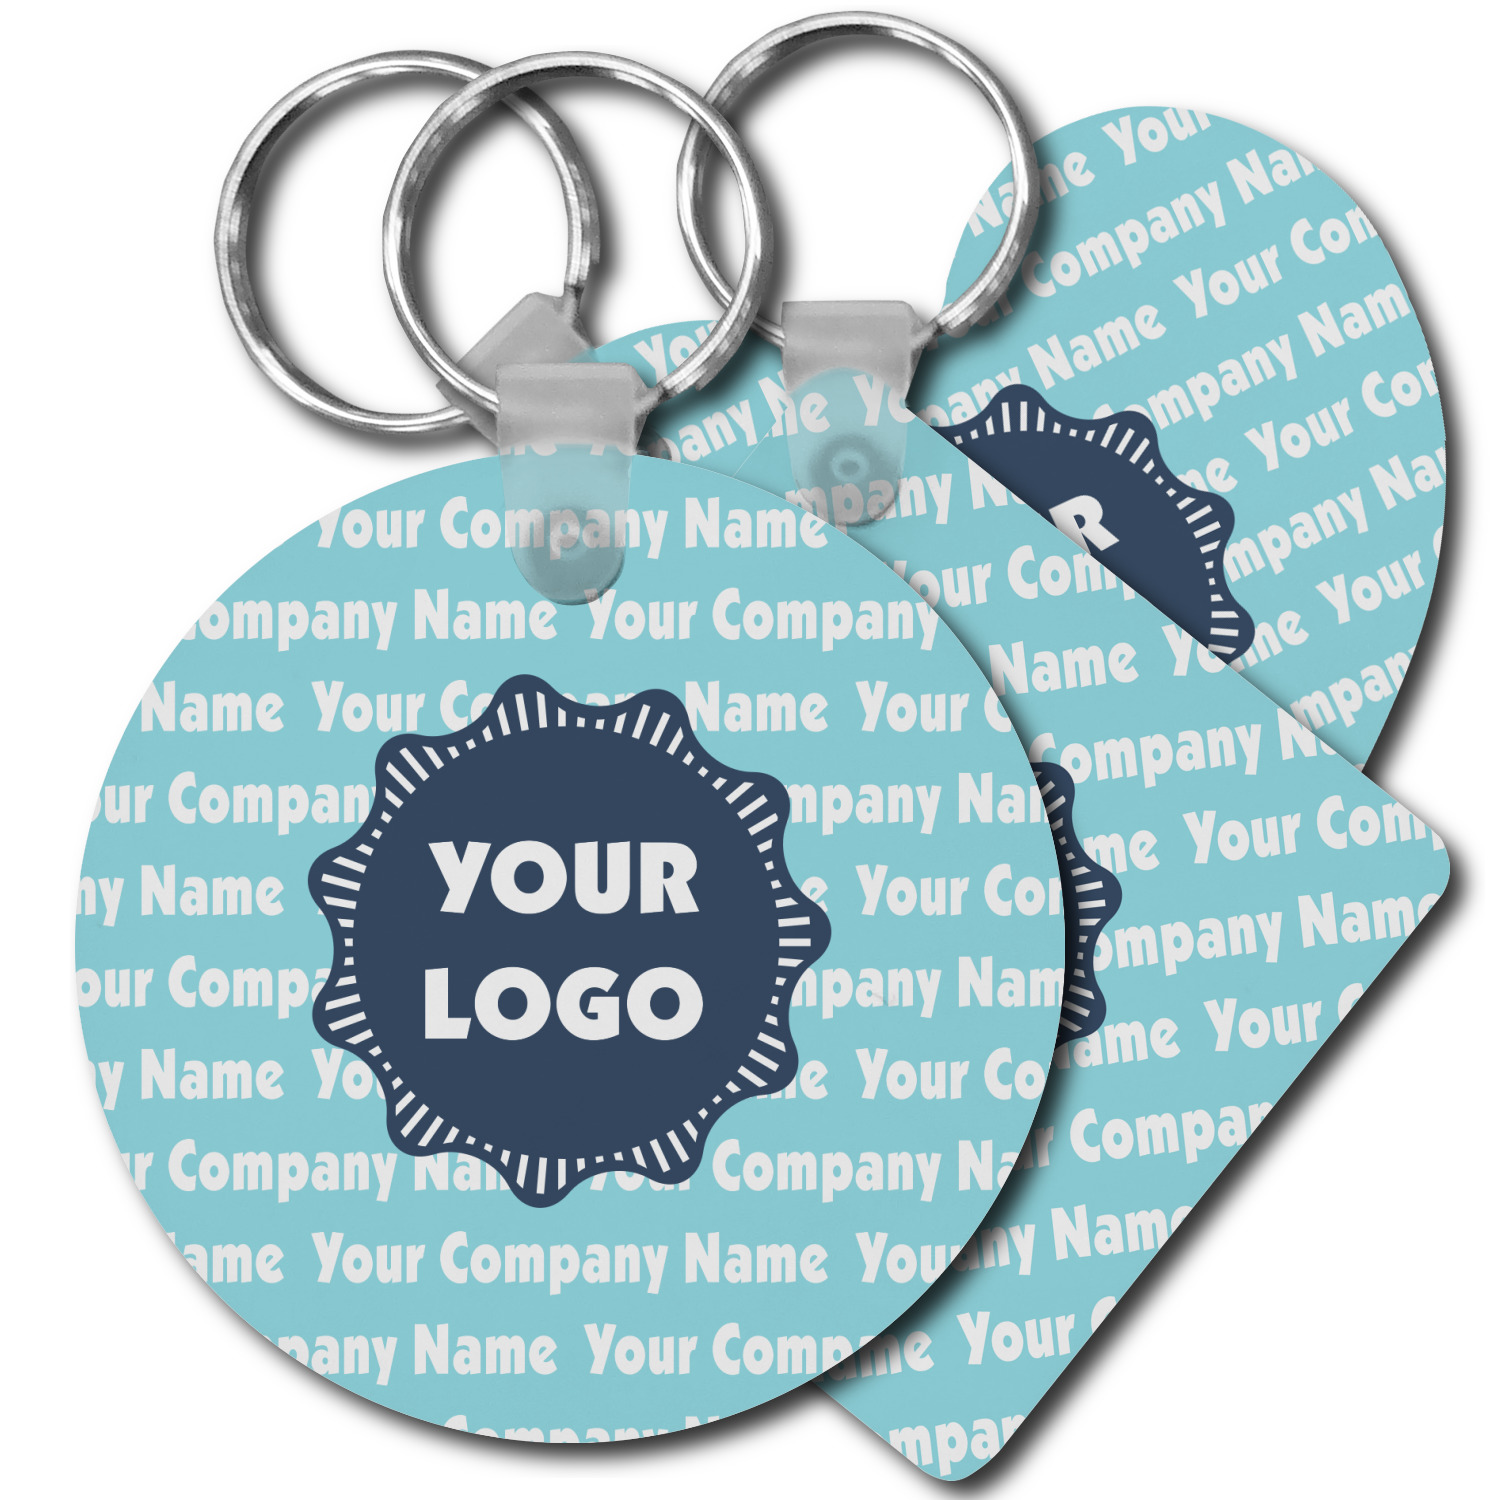 Create Your Custom Keychains With Logo & Texts 